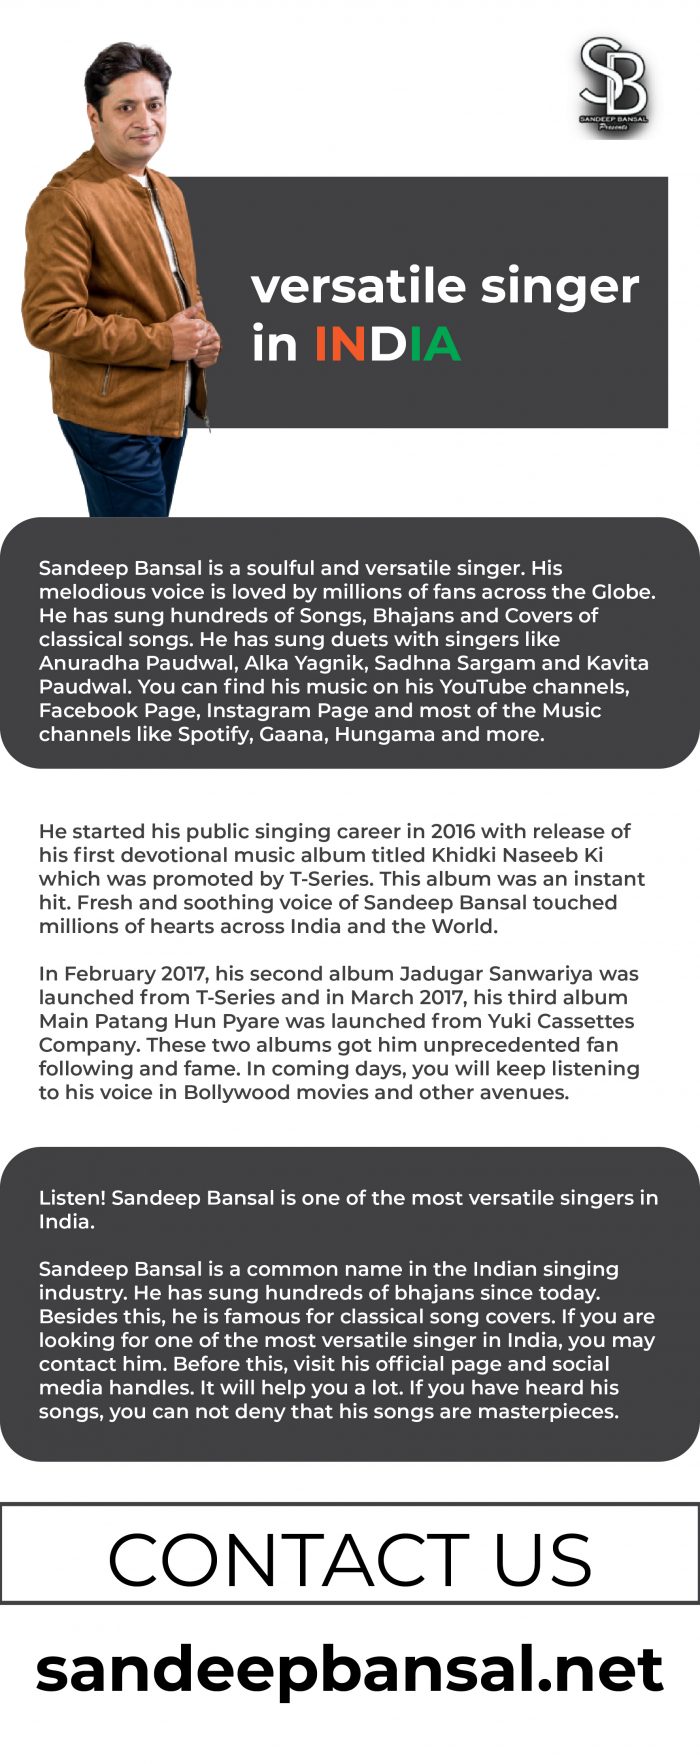 Listen! Sandeep Bansal is one of the most versatile singers in India.